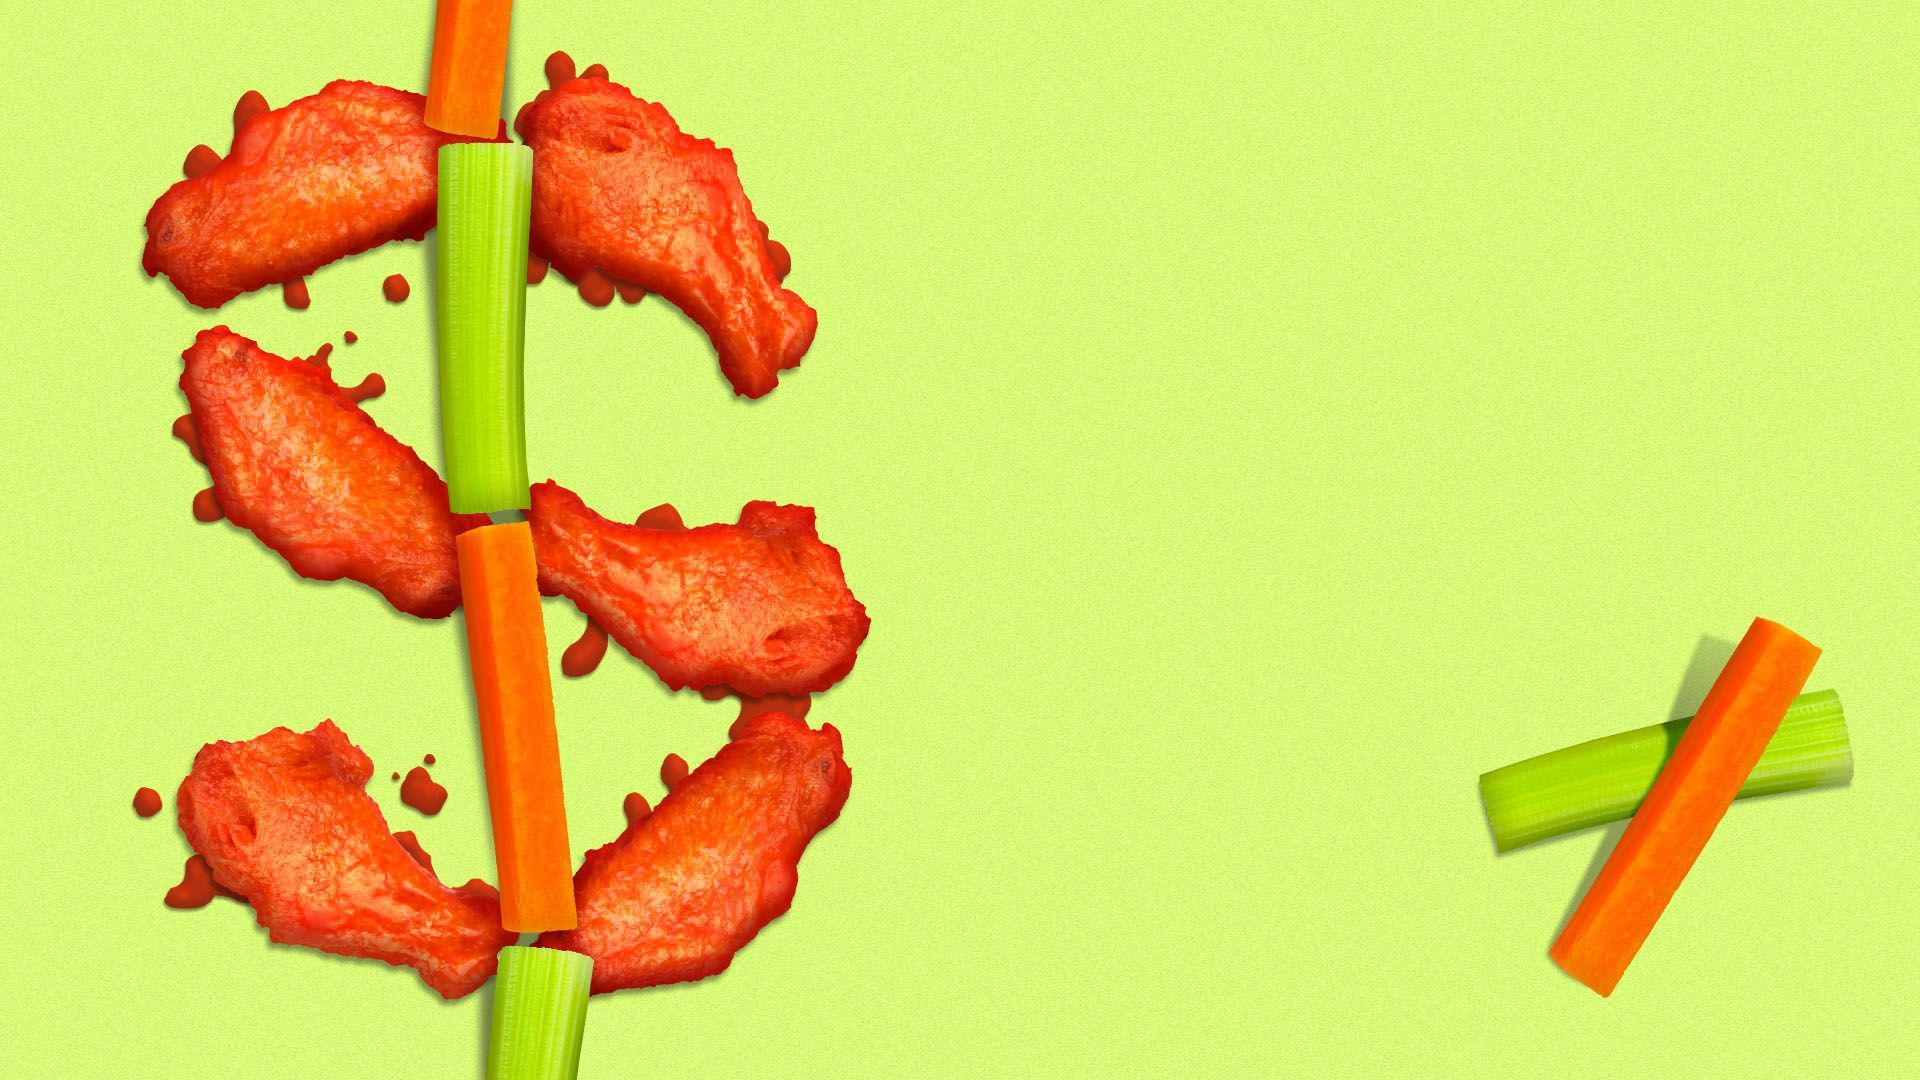 Illustration of buffalo wings, celery, and carrots forming the shape of a dollar sign